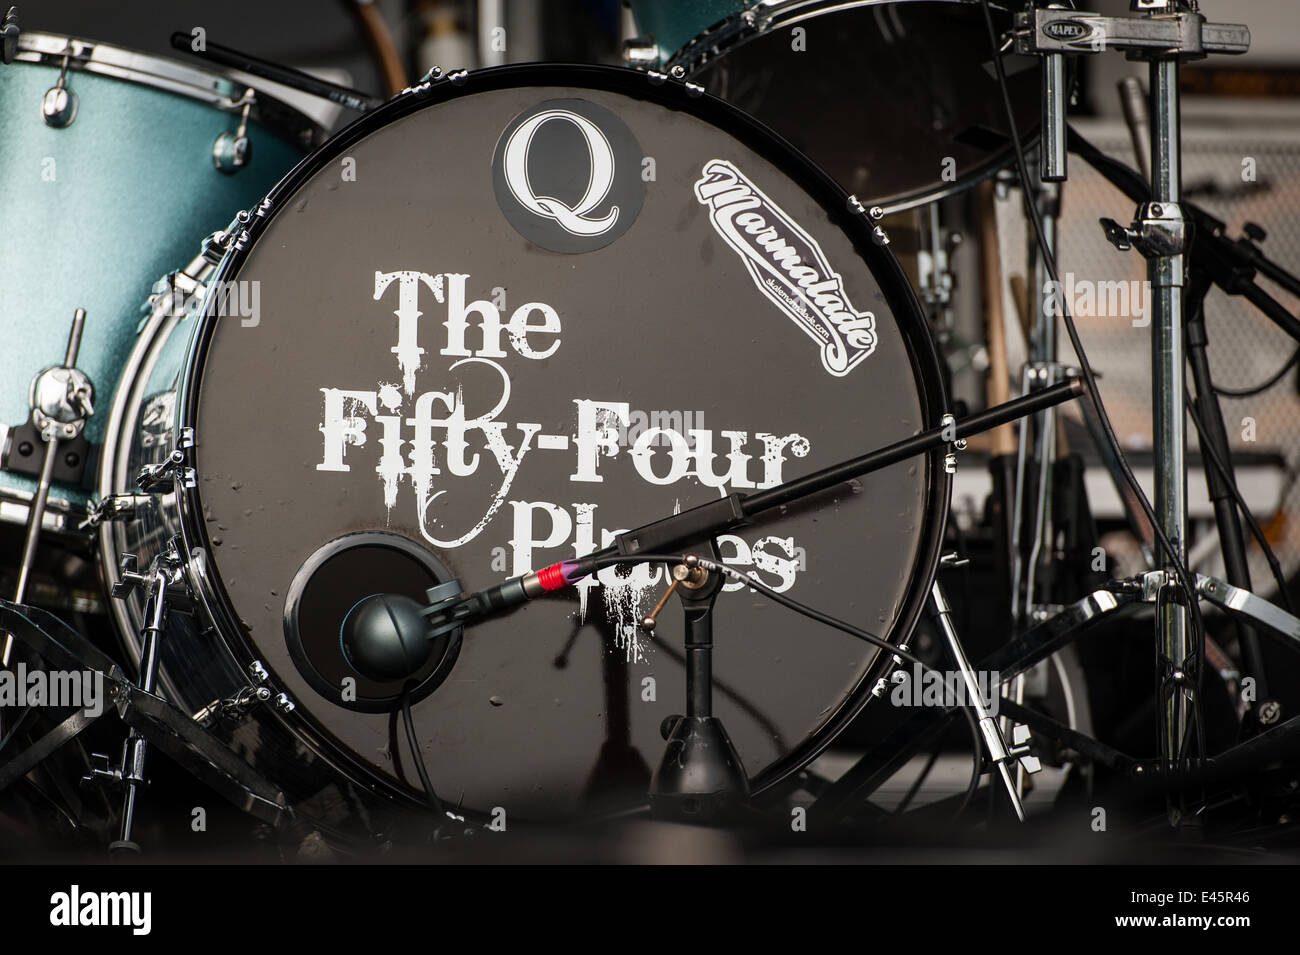 The Fifty four plates on stage at The Bearded Theory festival Stock Photo